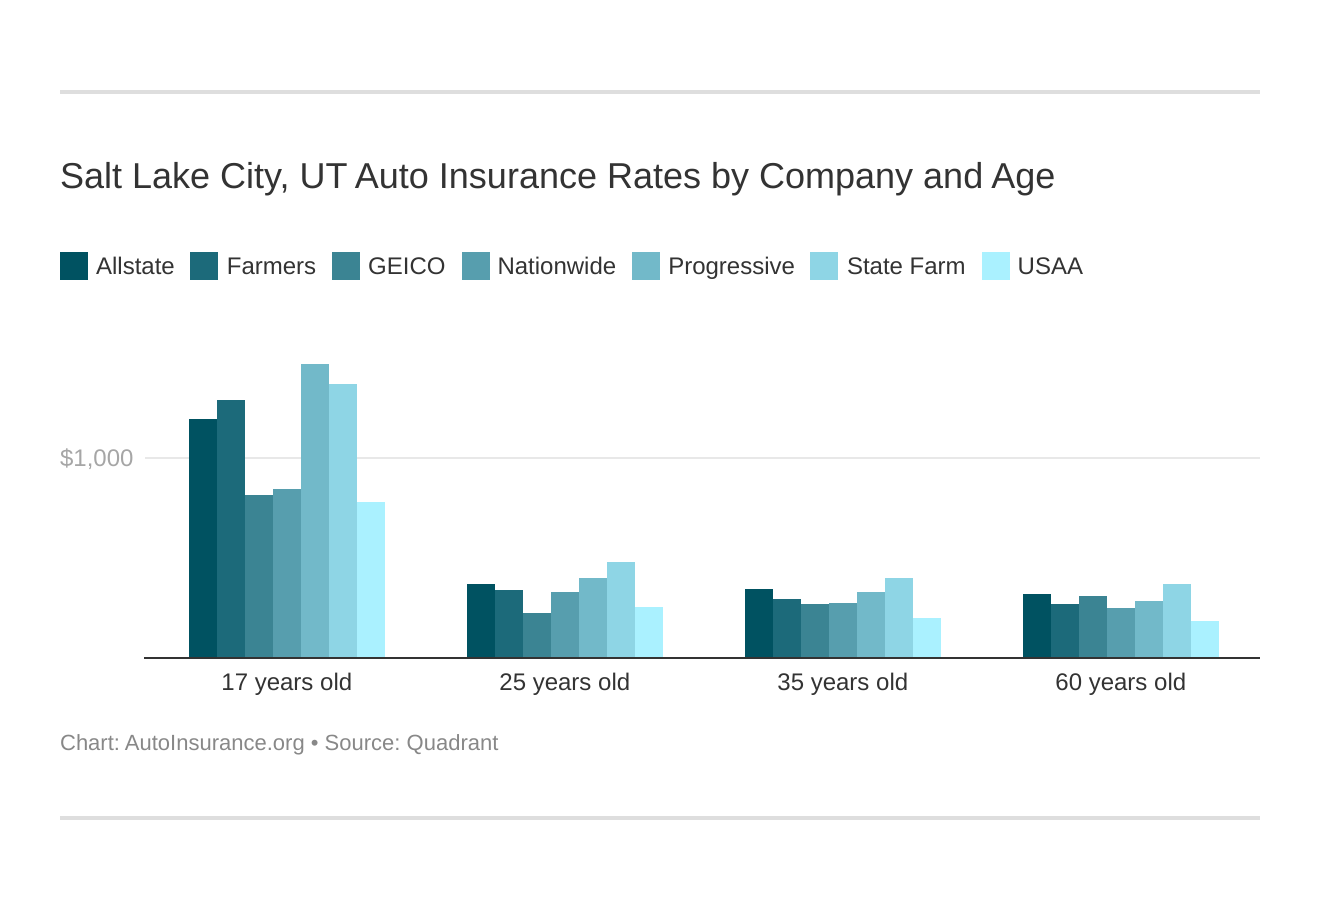 Salt Lake City, UT Auto Insurance Rates by Company and Age